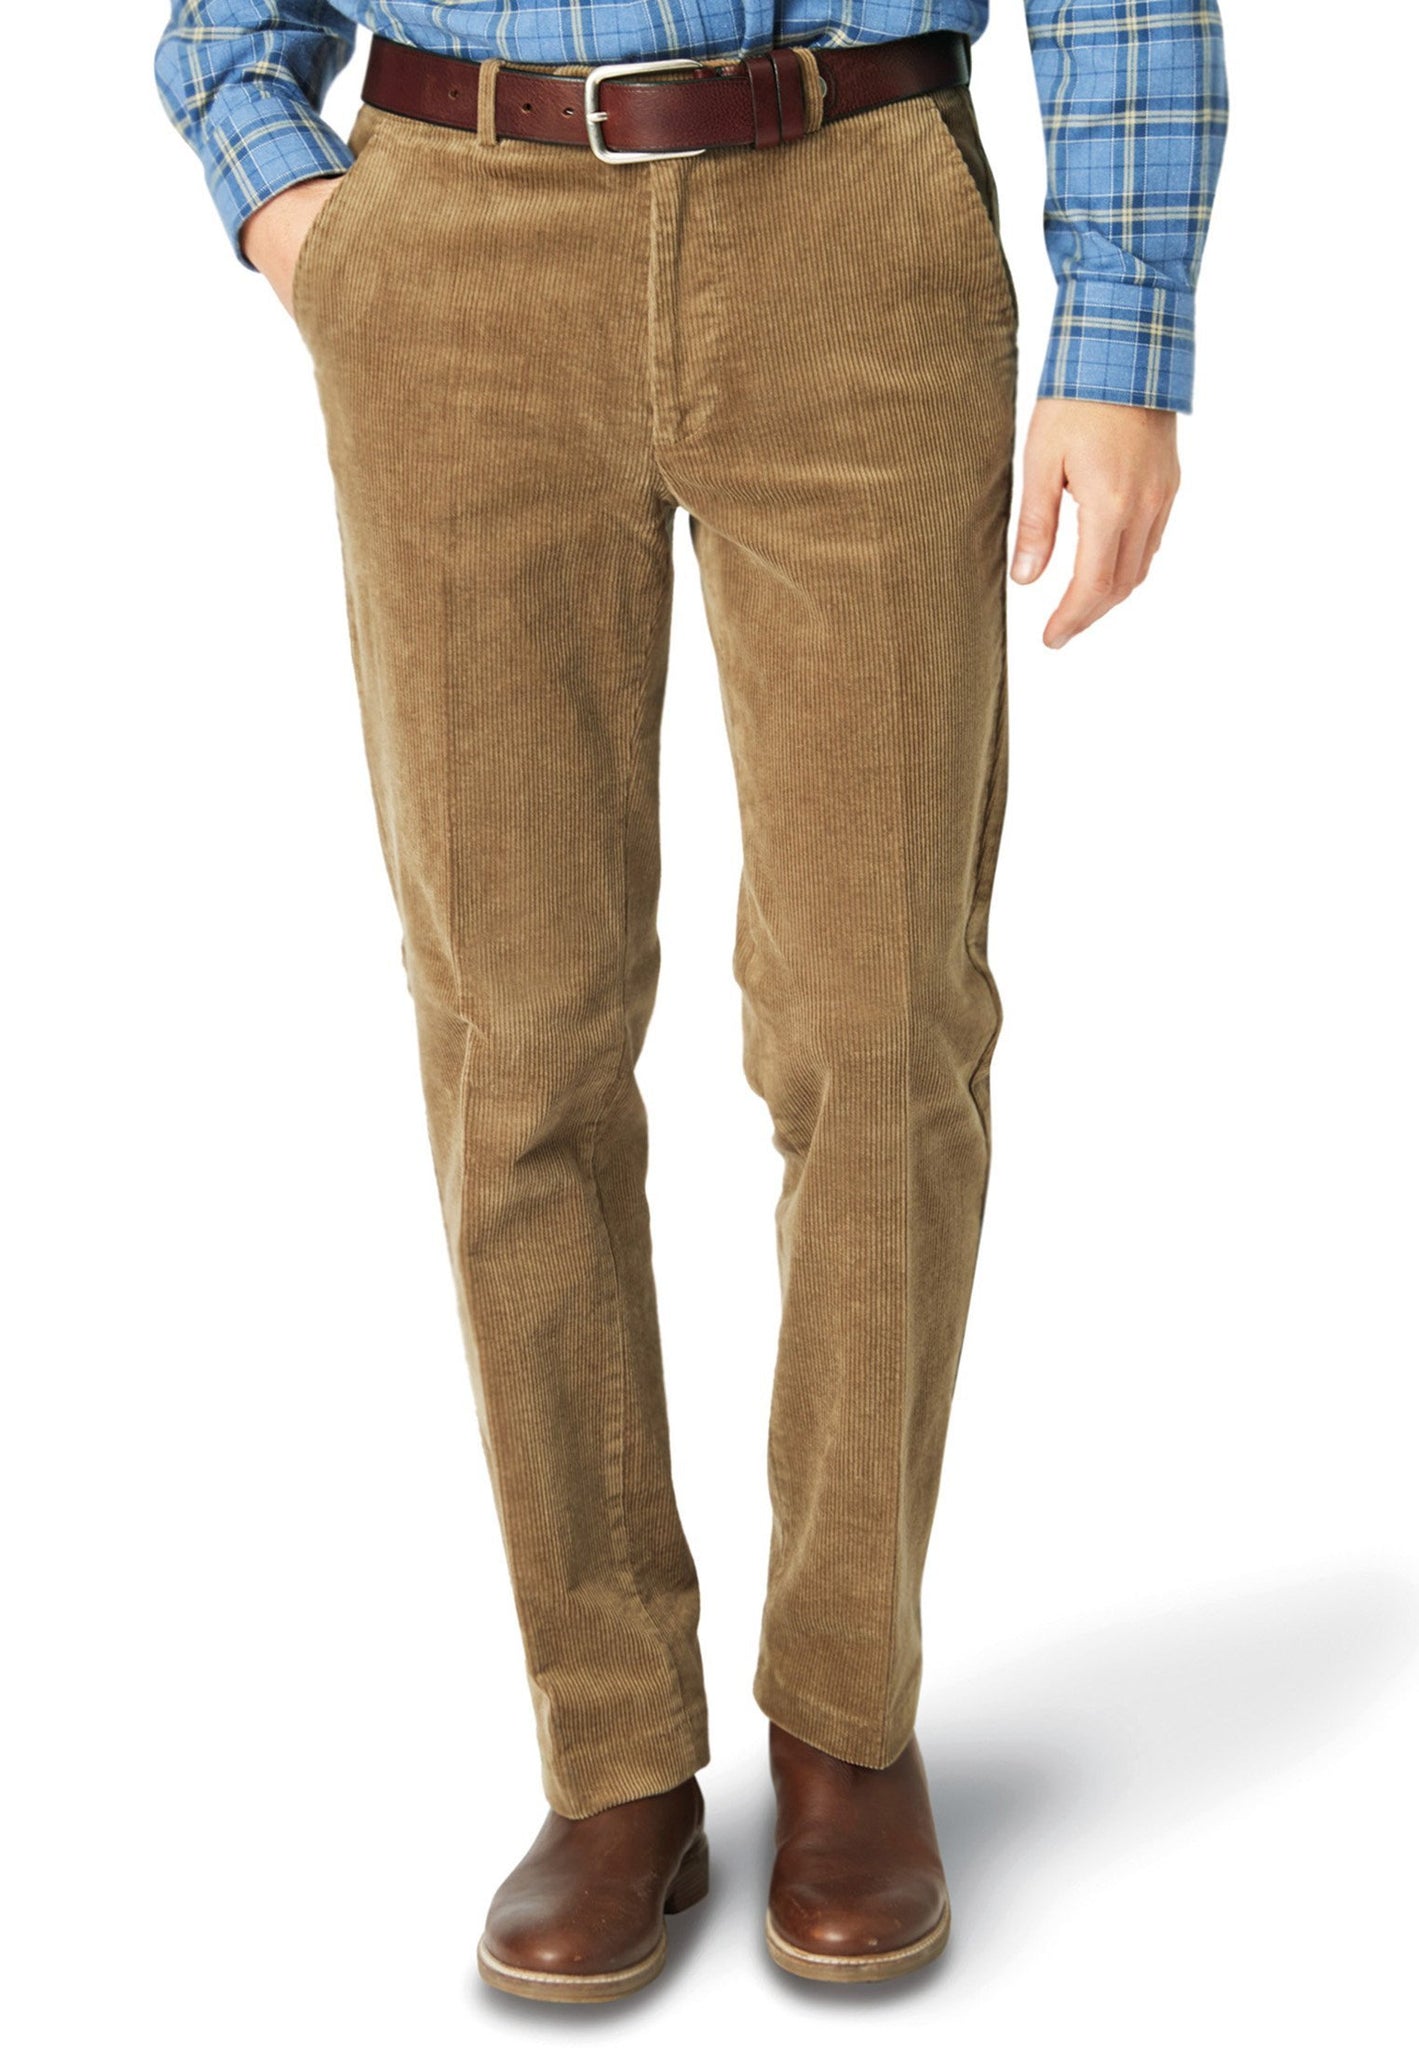 CORDUROY RUGBY PANT